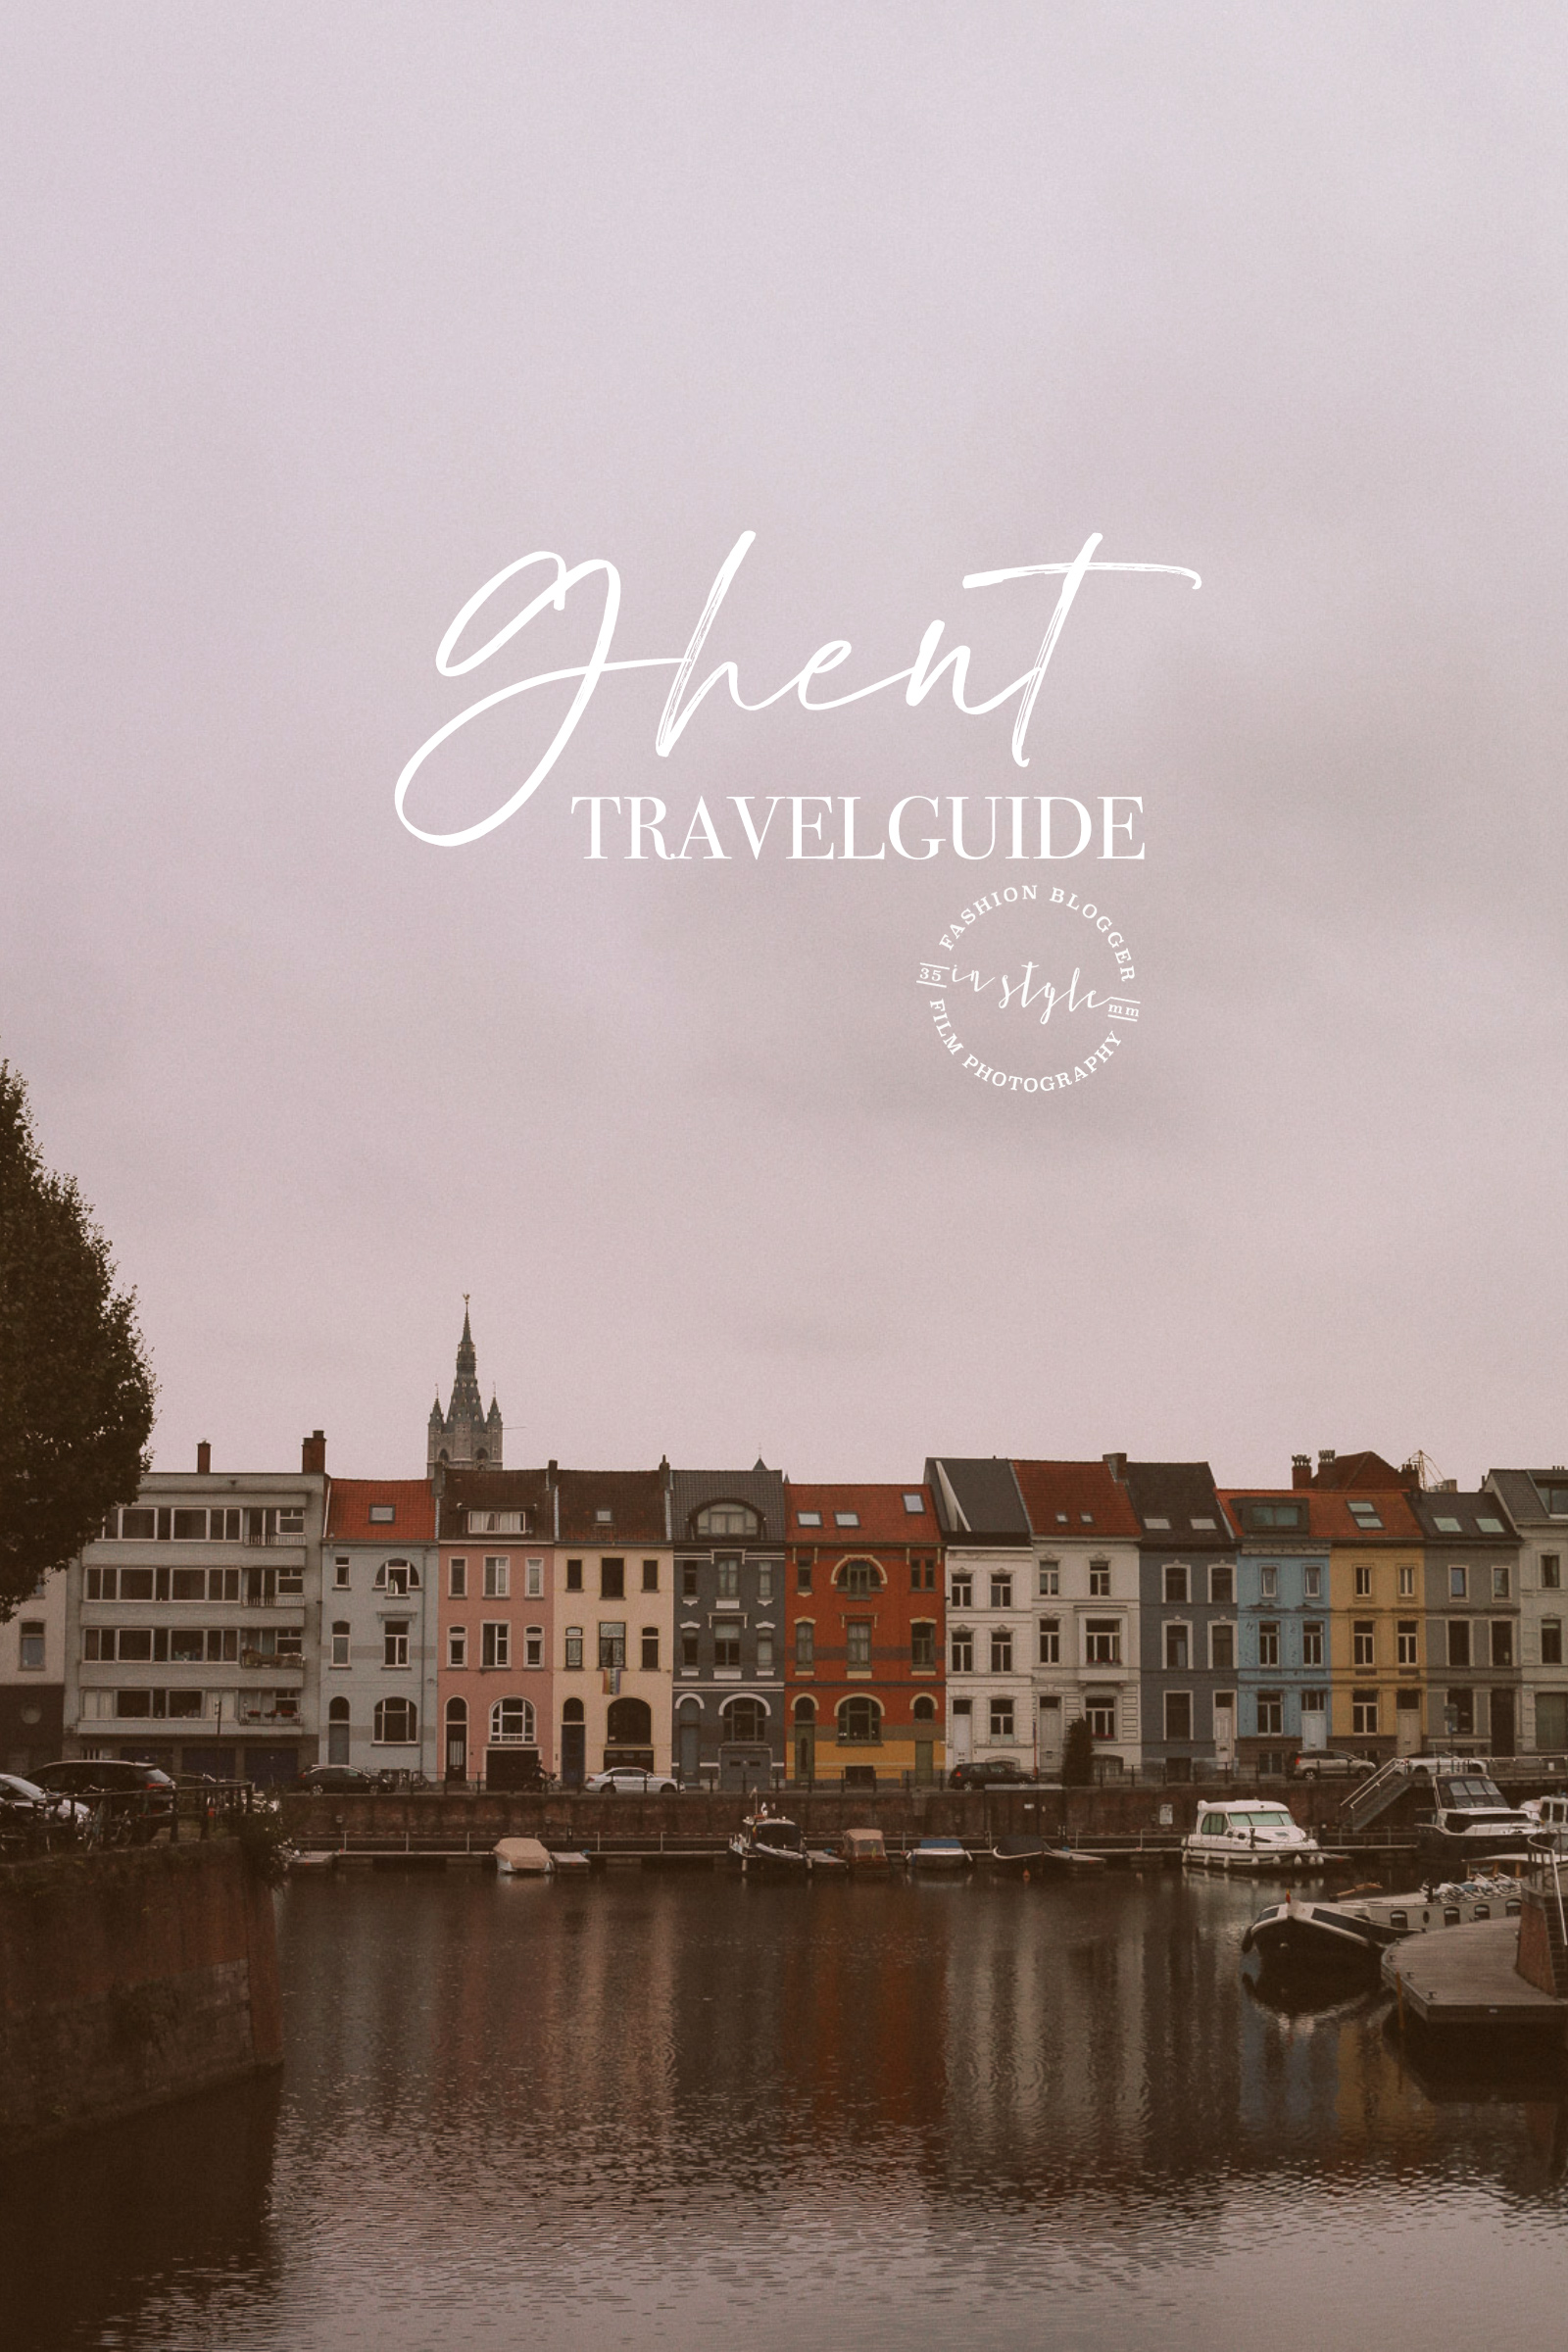 The Travel Photography Guide of Ghent in Belgium